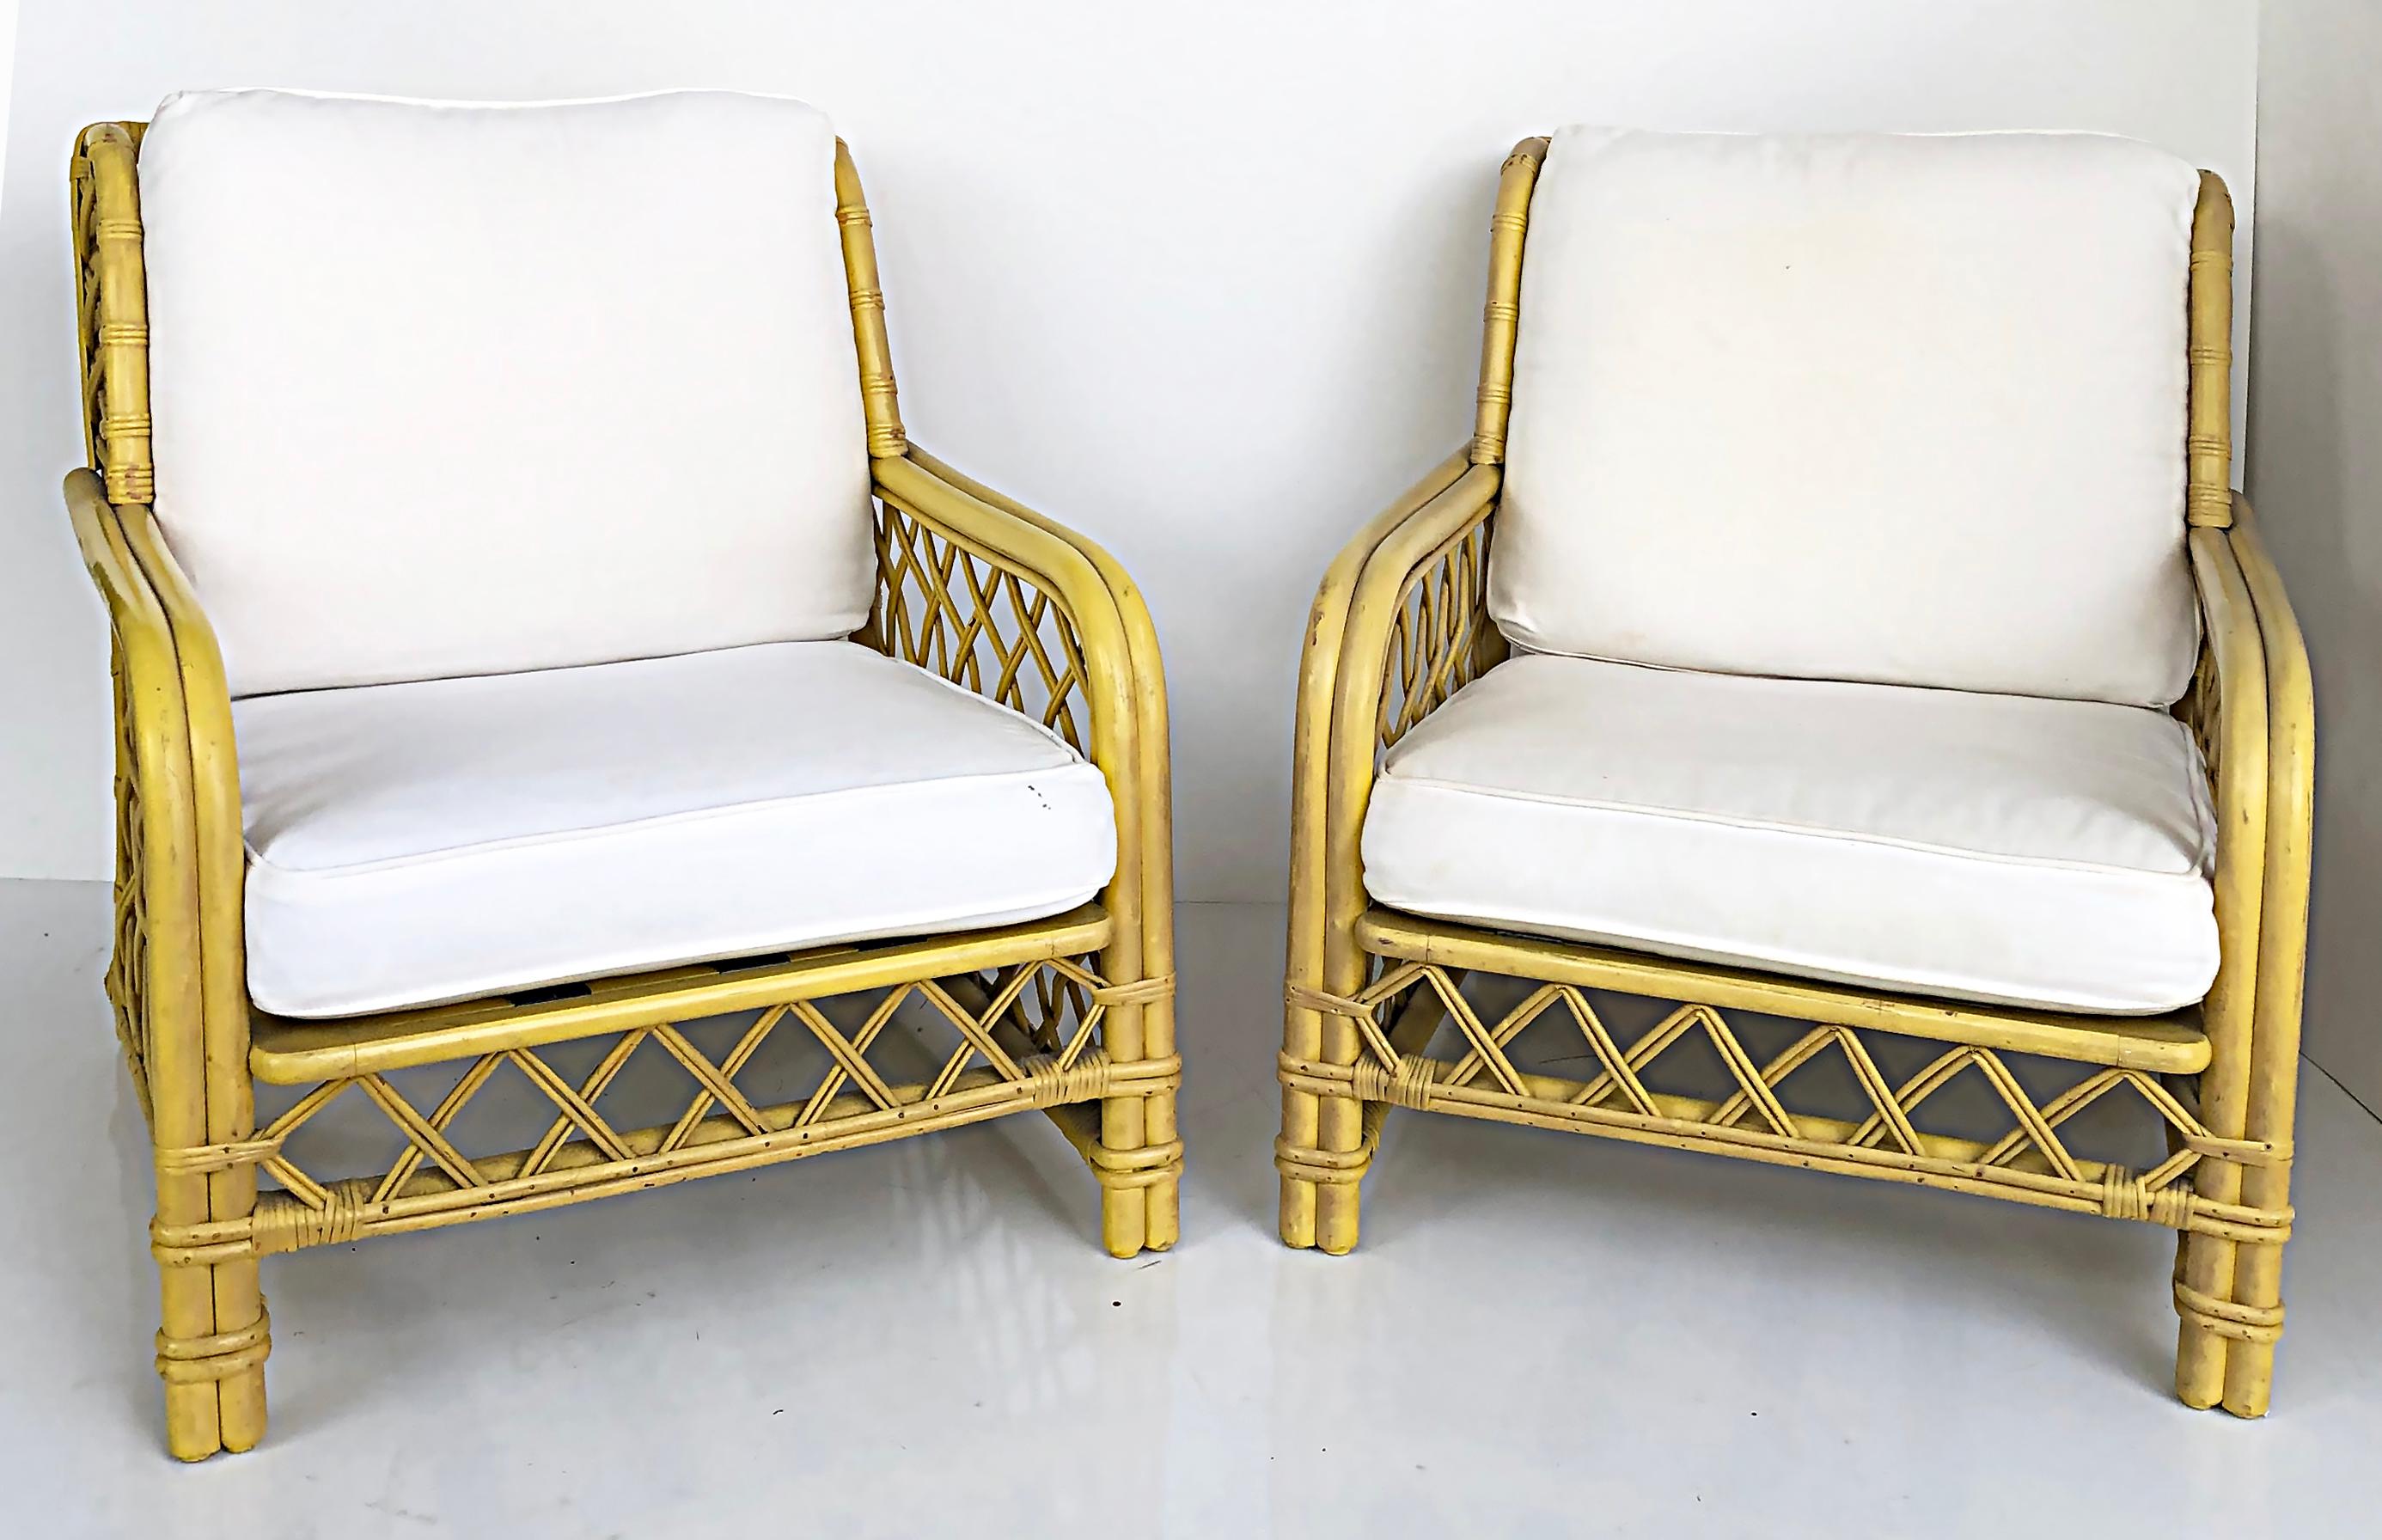 Ficks Reed bent / woven rattan upholstered lounge chairs

Offered for sale is a pair of vintage Ficks Reed lounge chairs with bent rattan frames and woven rattan sides. The chairs are upholstered in canvas and the frames were painted and now have